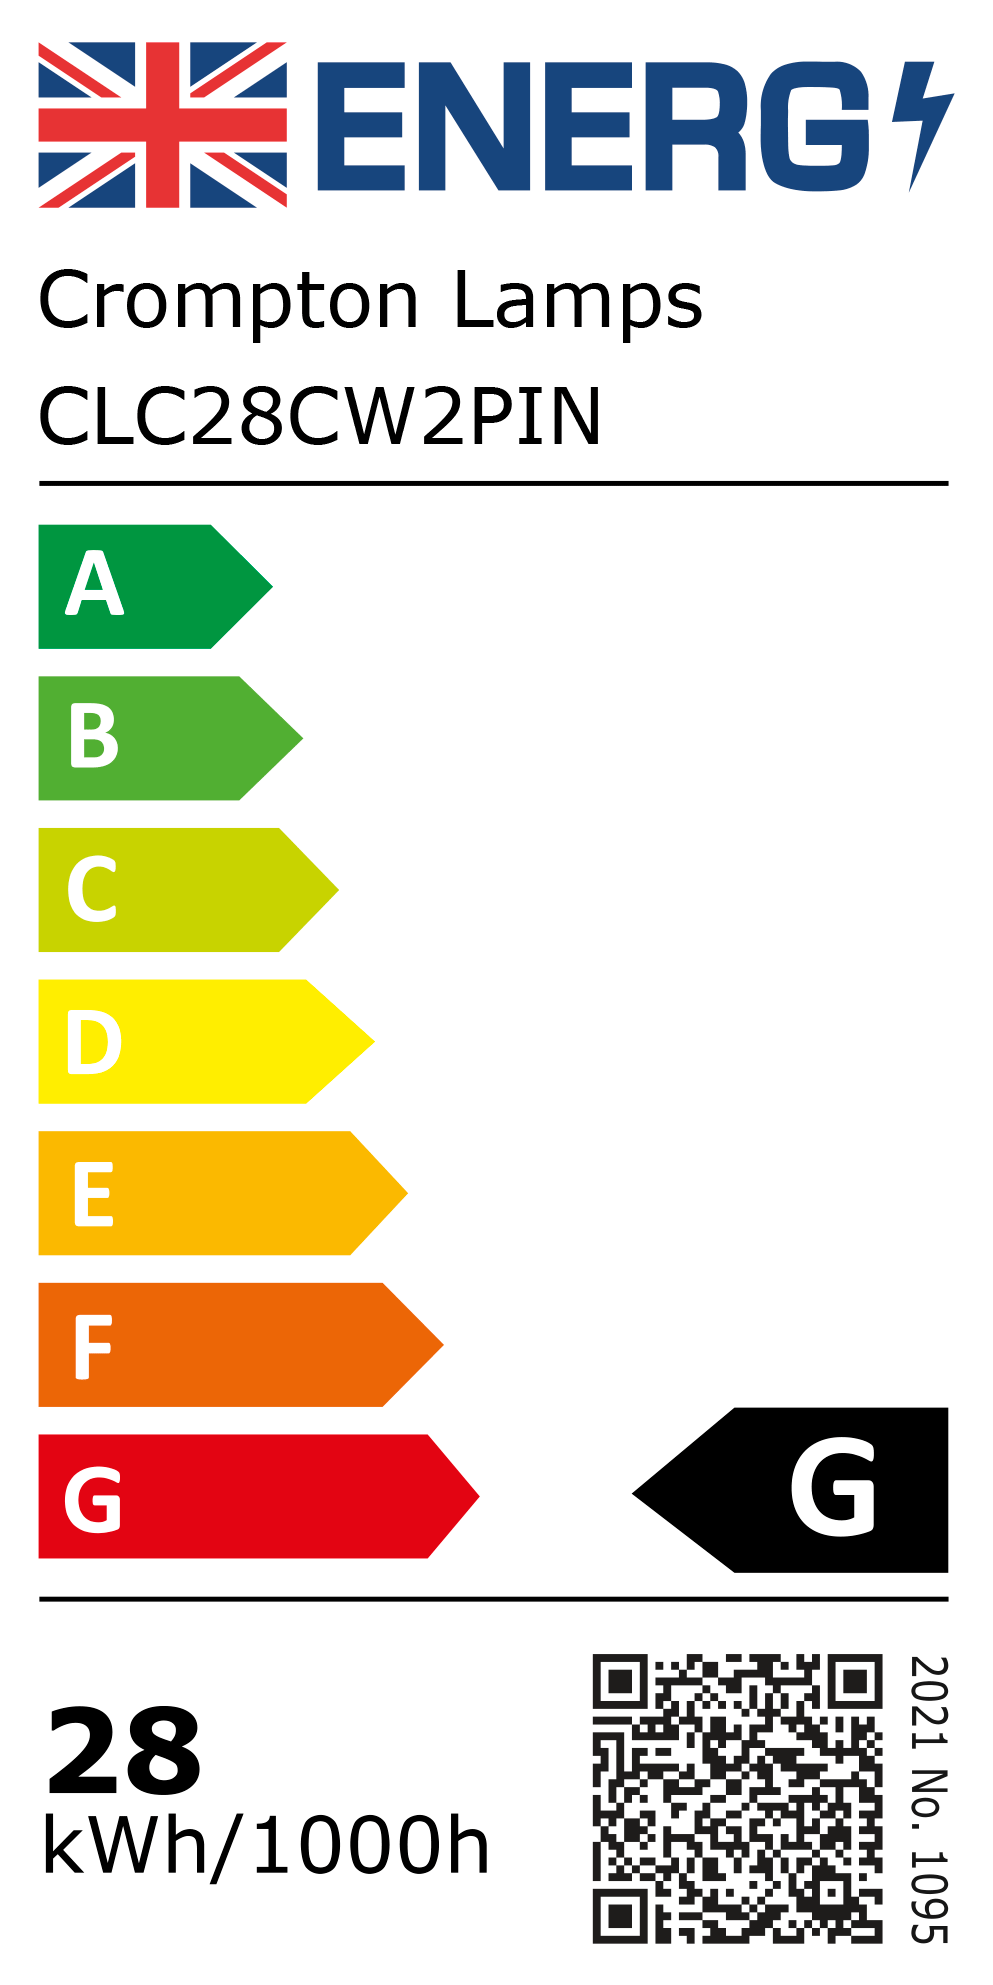 New 2021 Energy Rating Label: Stock Code CLC28CW2PIN